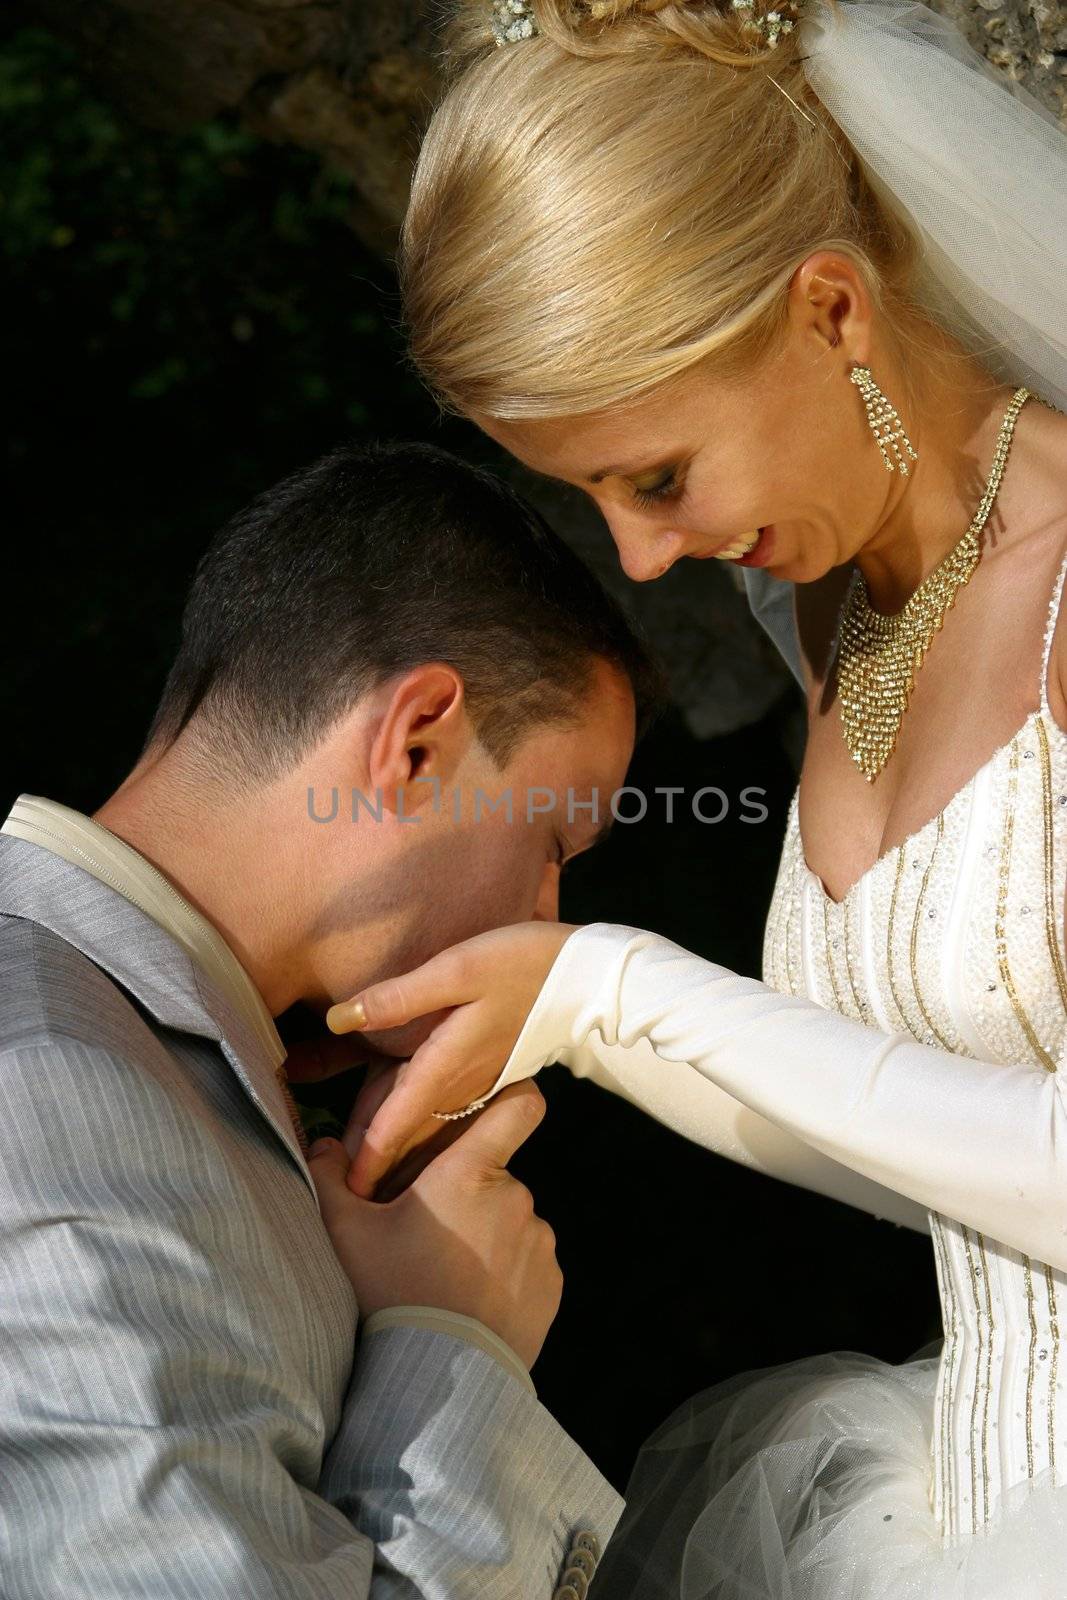 The groom kisses palms to the bride